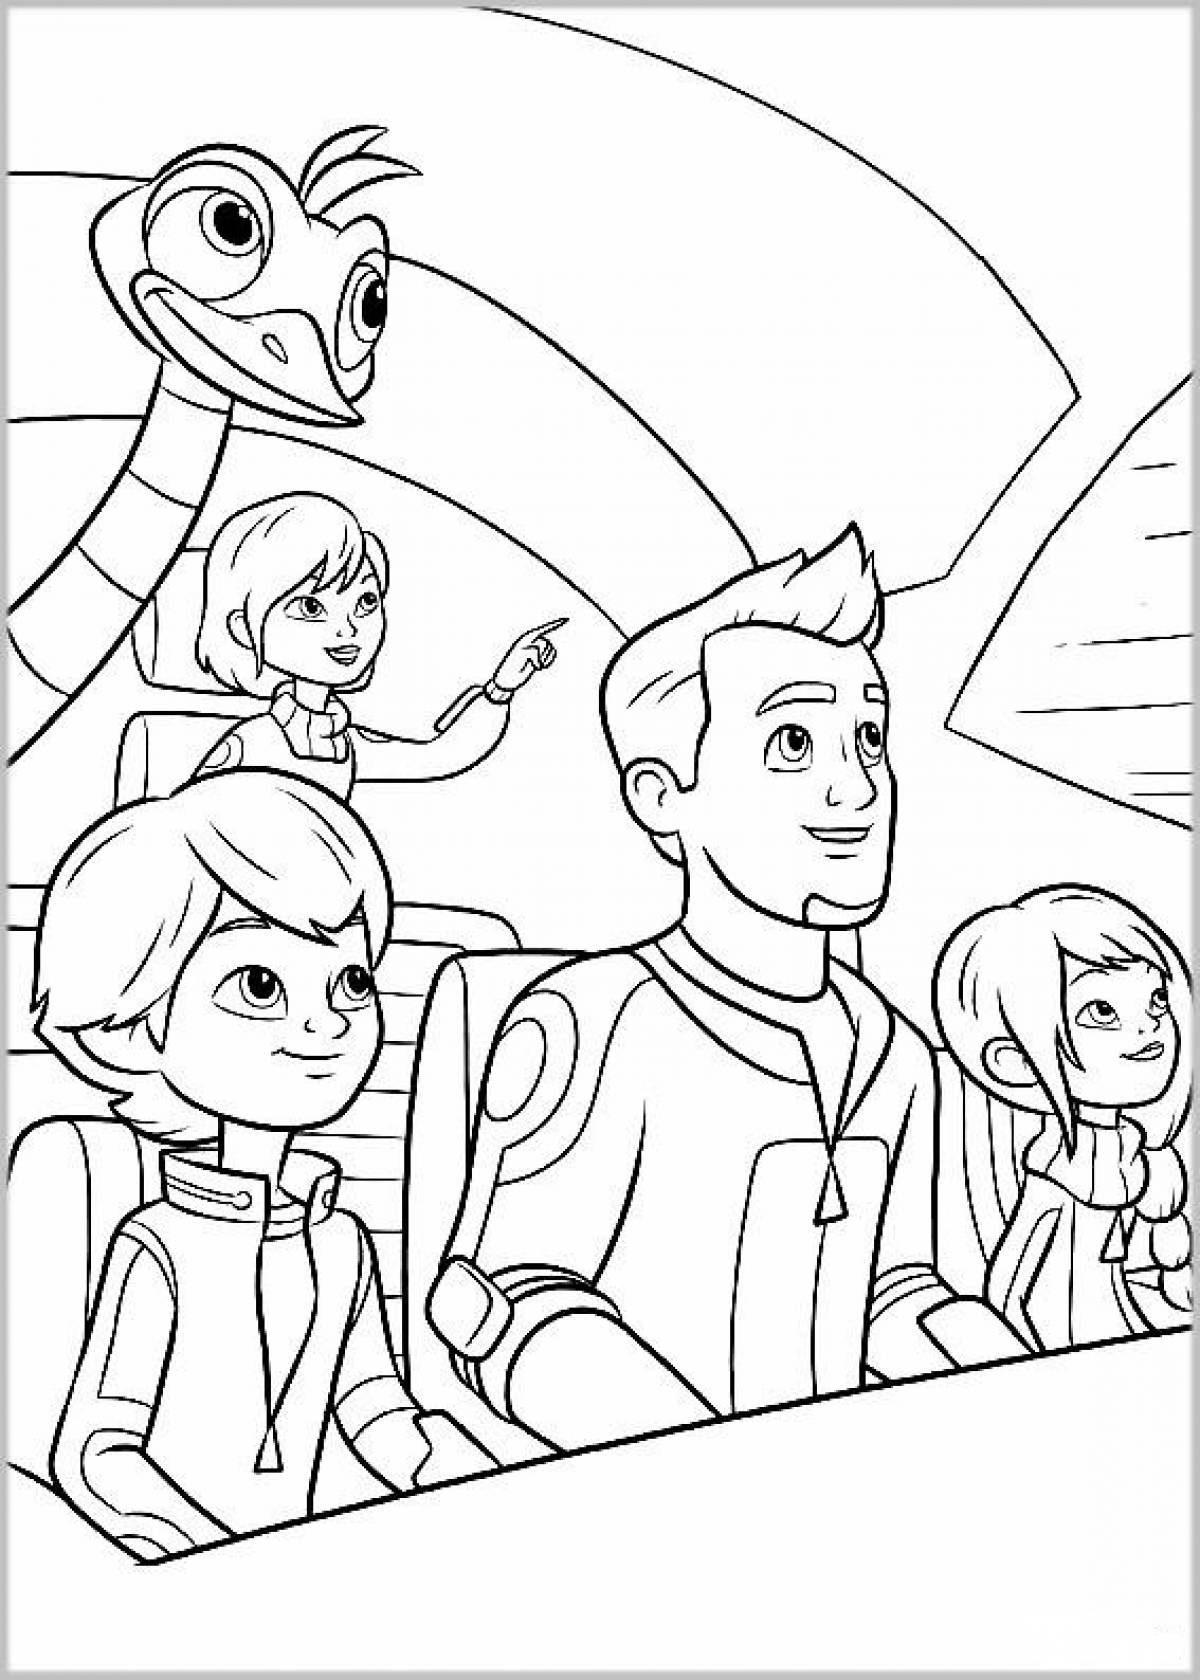 Photo Miles from another planet coloring page